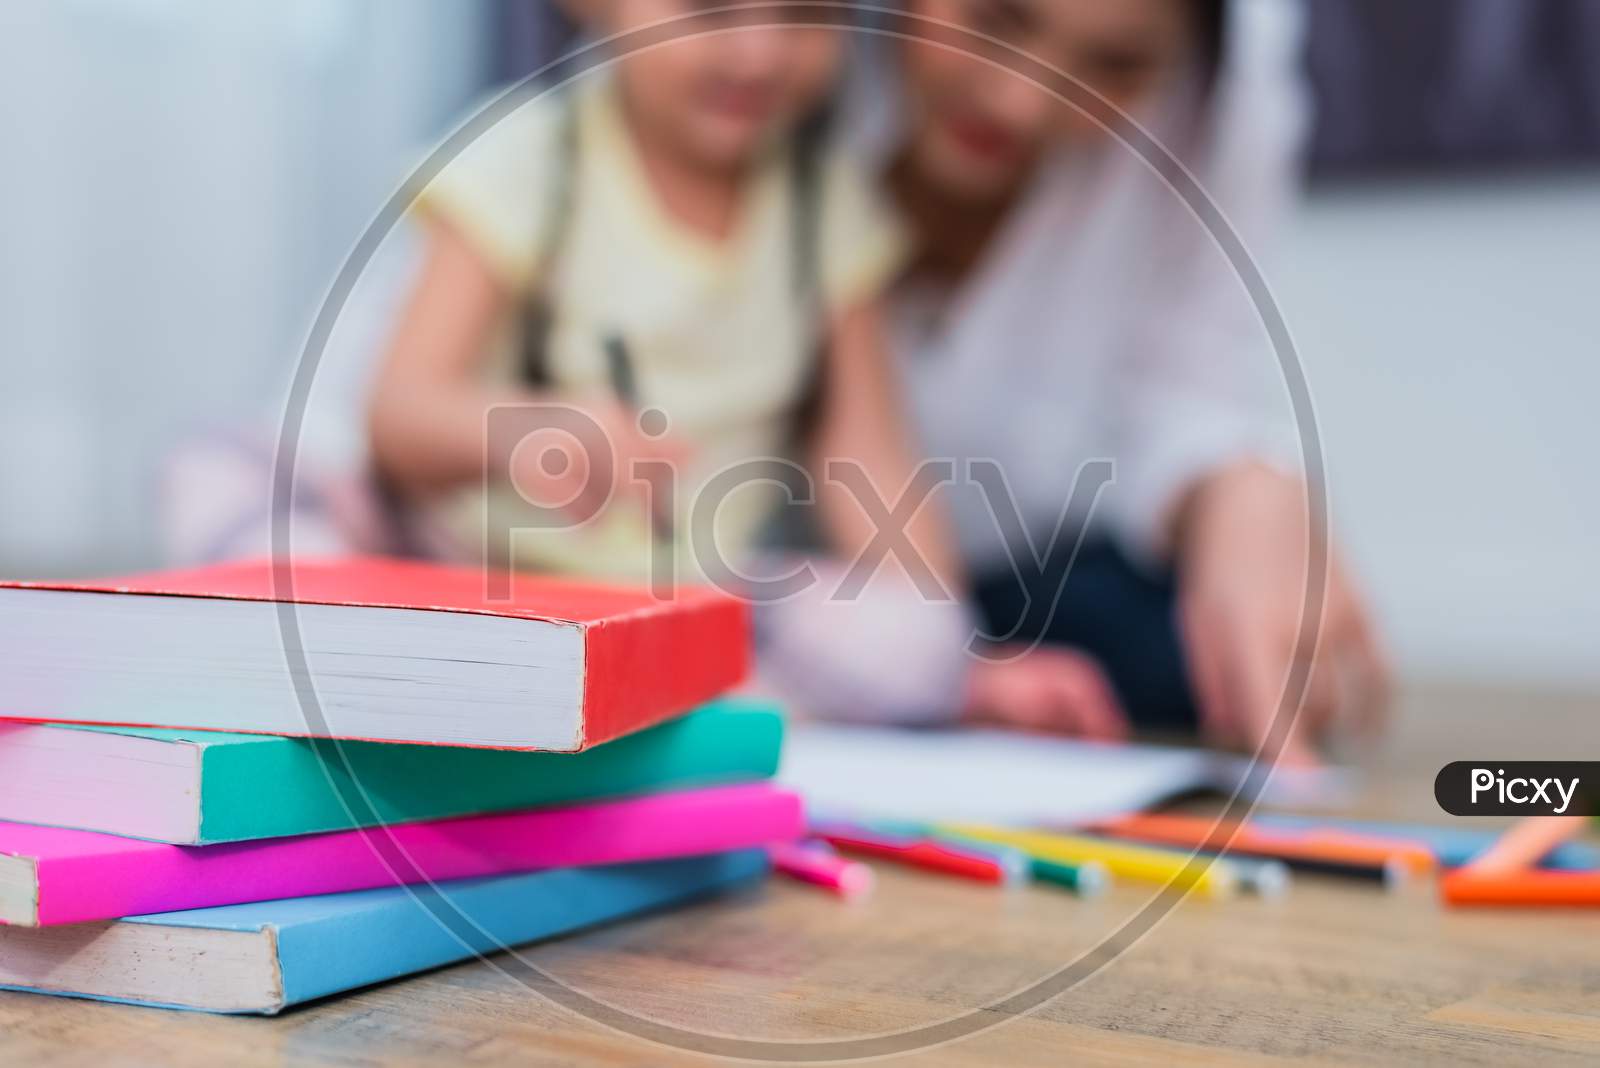 Close Up Of Books On Floor With Mom And Kids Background. Back To School And Education Concept. Children And Teacher Theme.